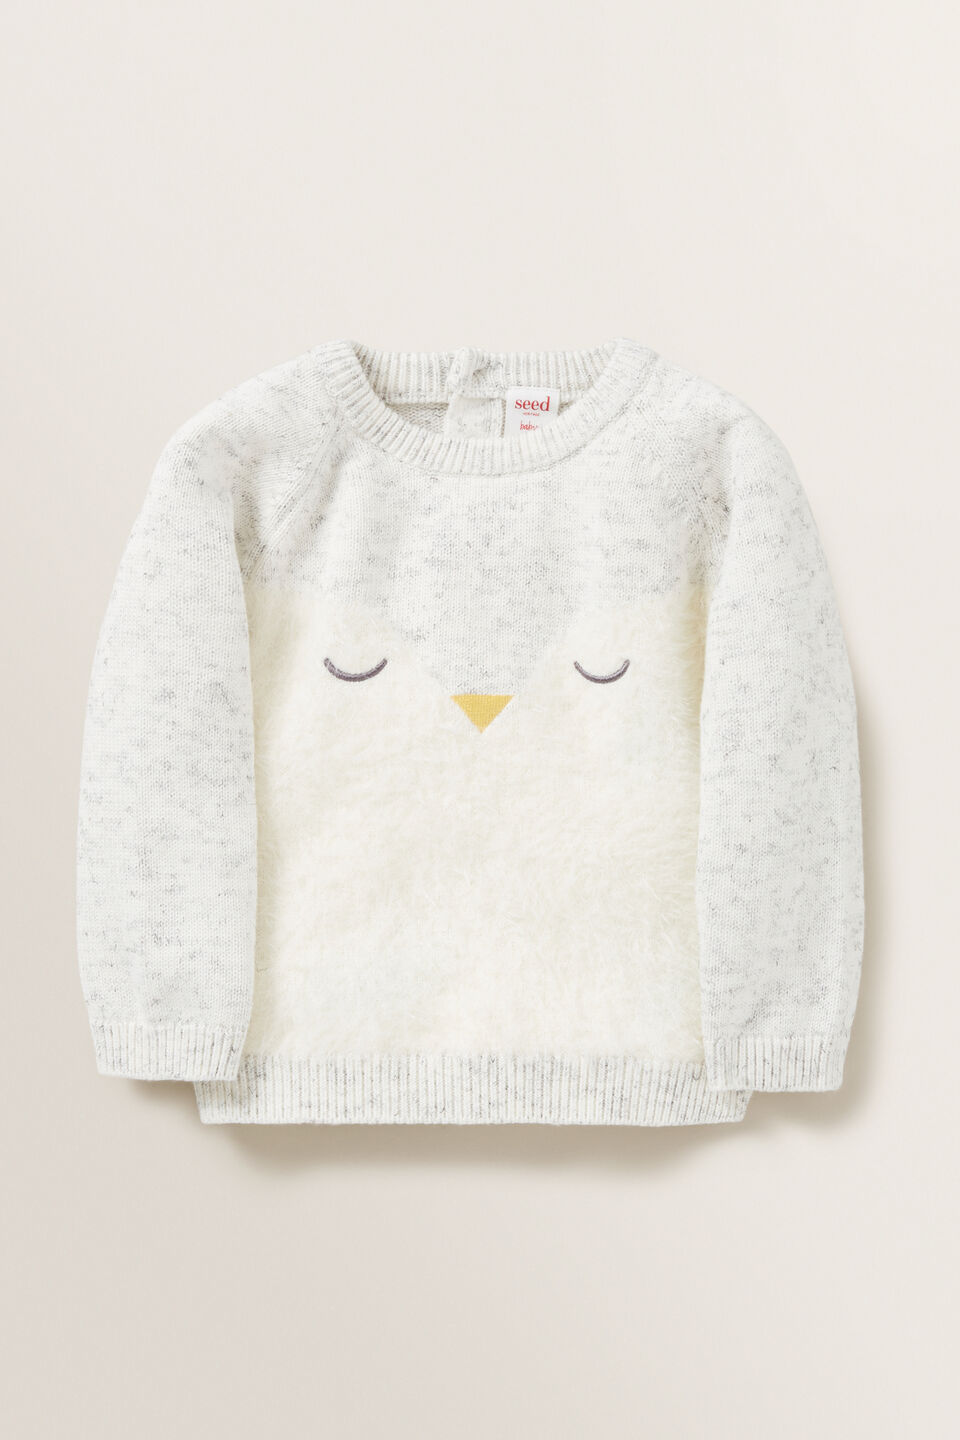 Penguin Knitted Sweater  